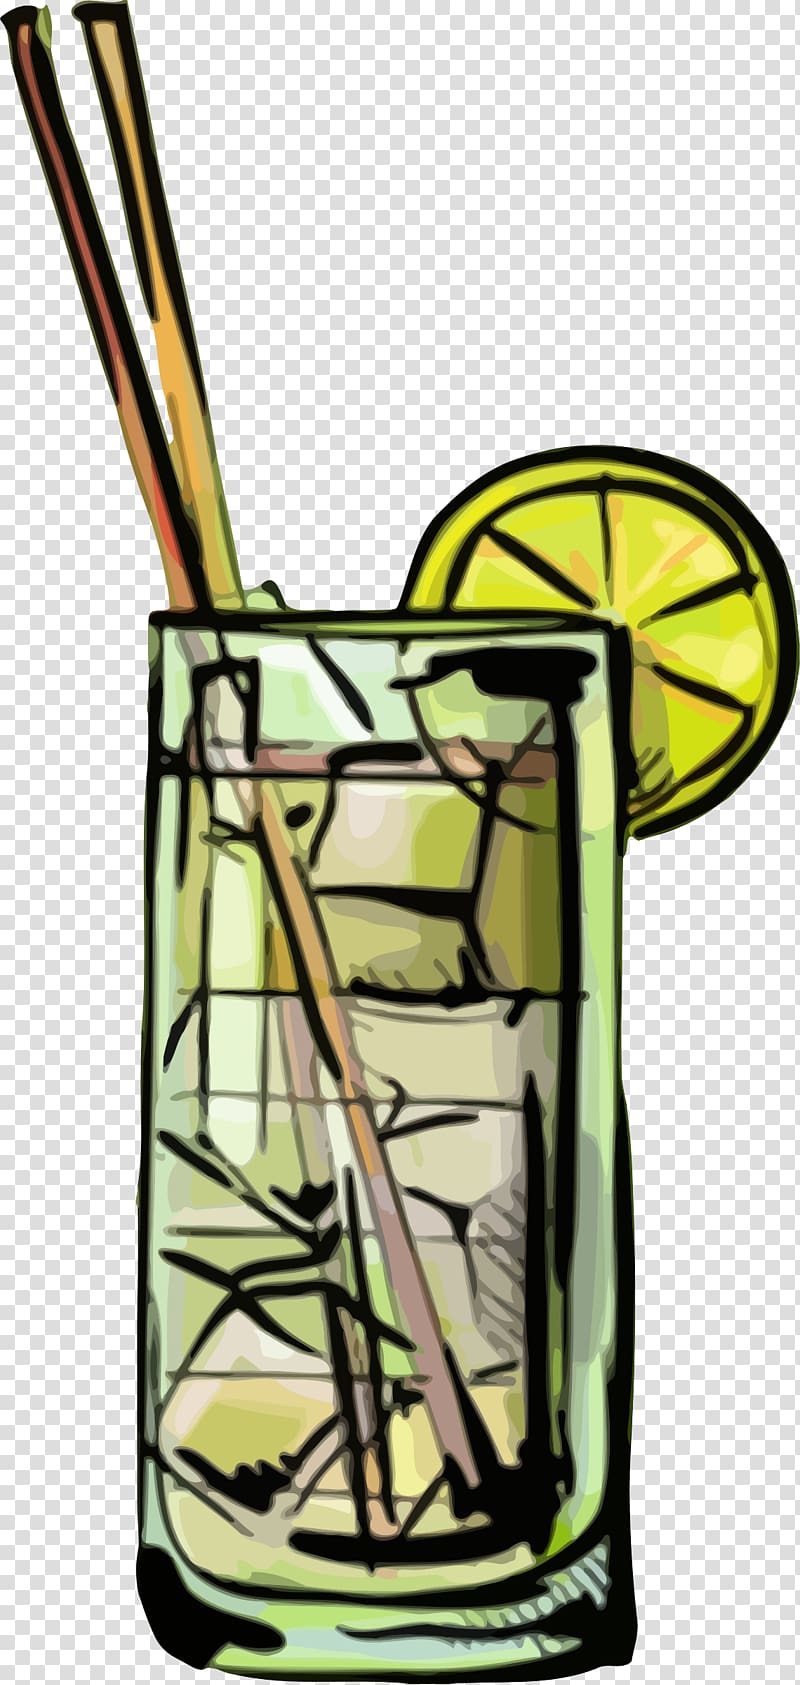 Long Island Iced Tea Cocktail Alcoholic drink, iced tea transparent background PNG clipart